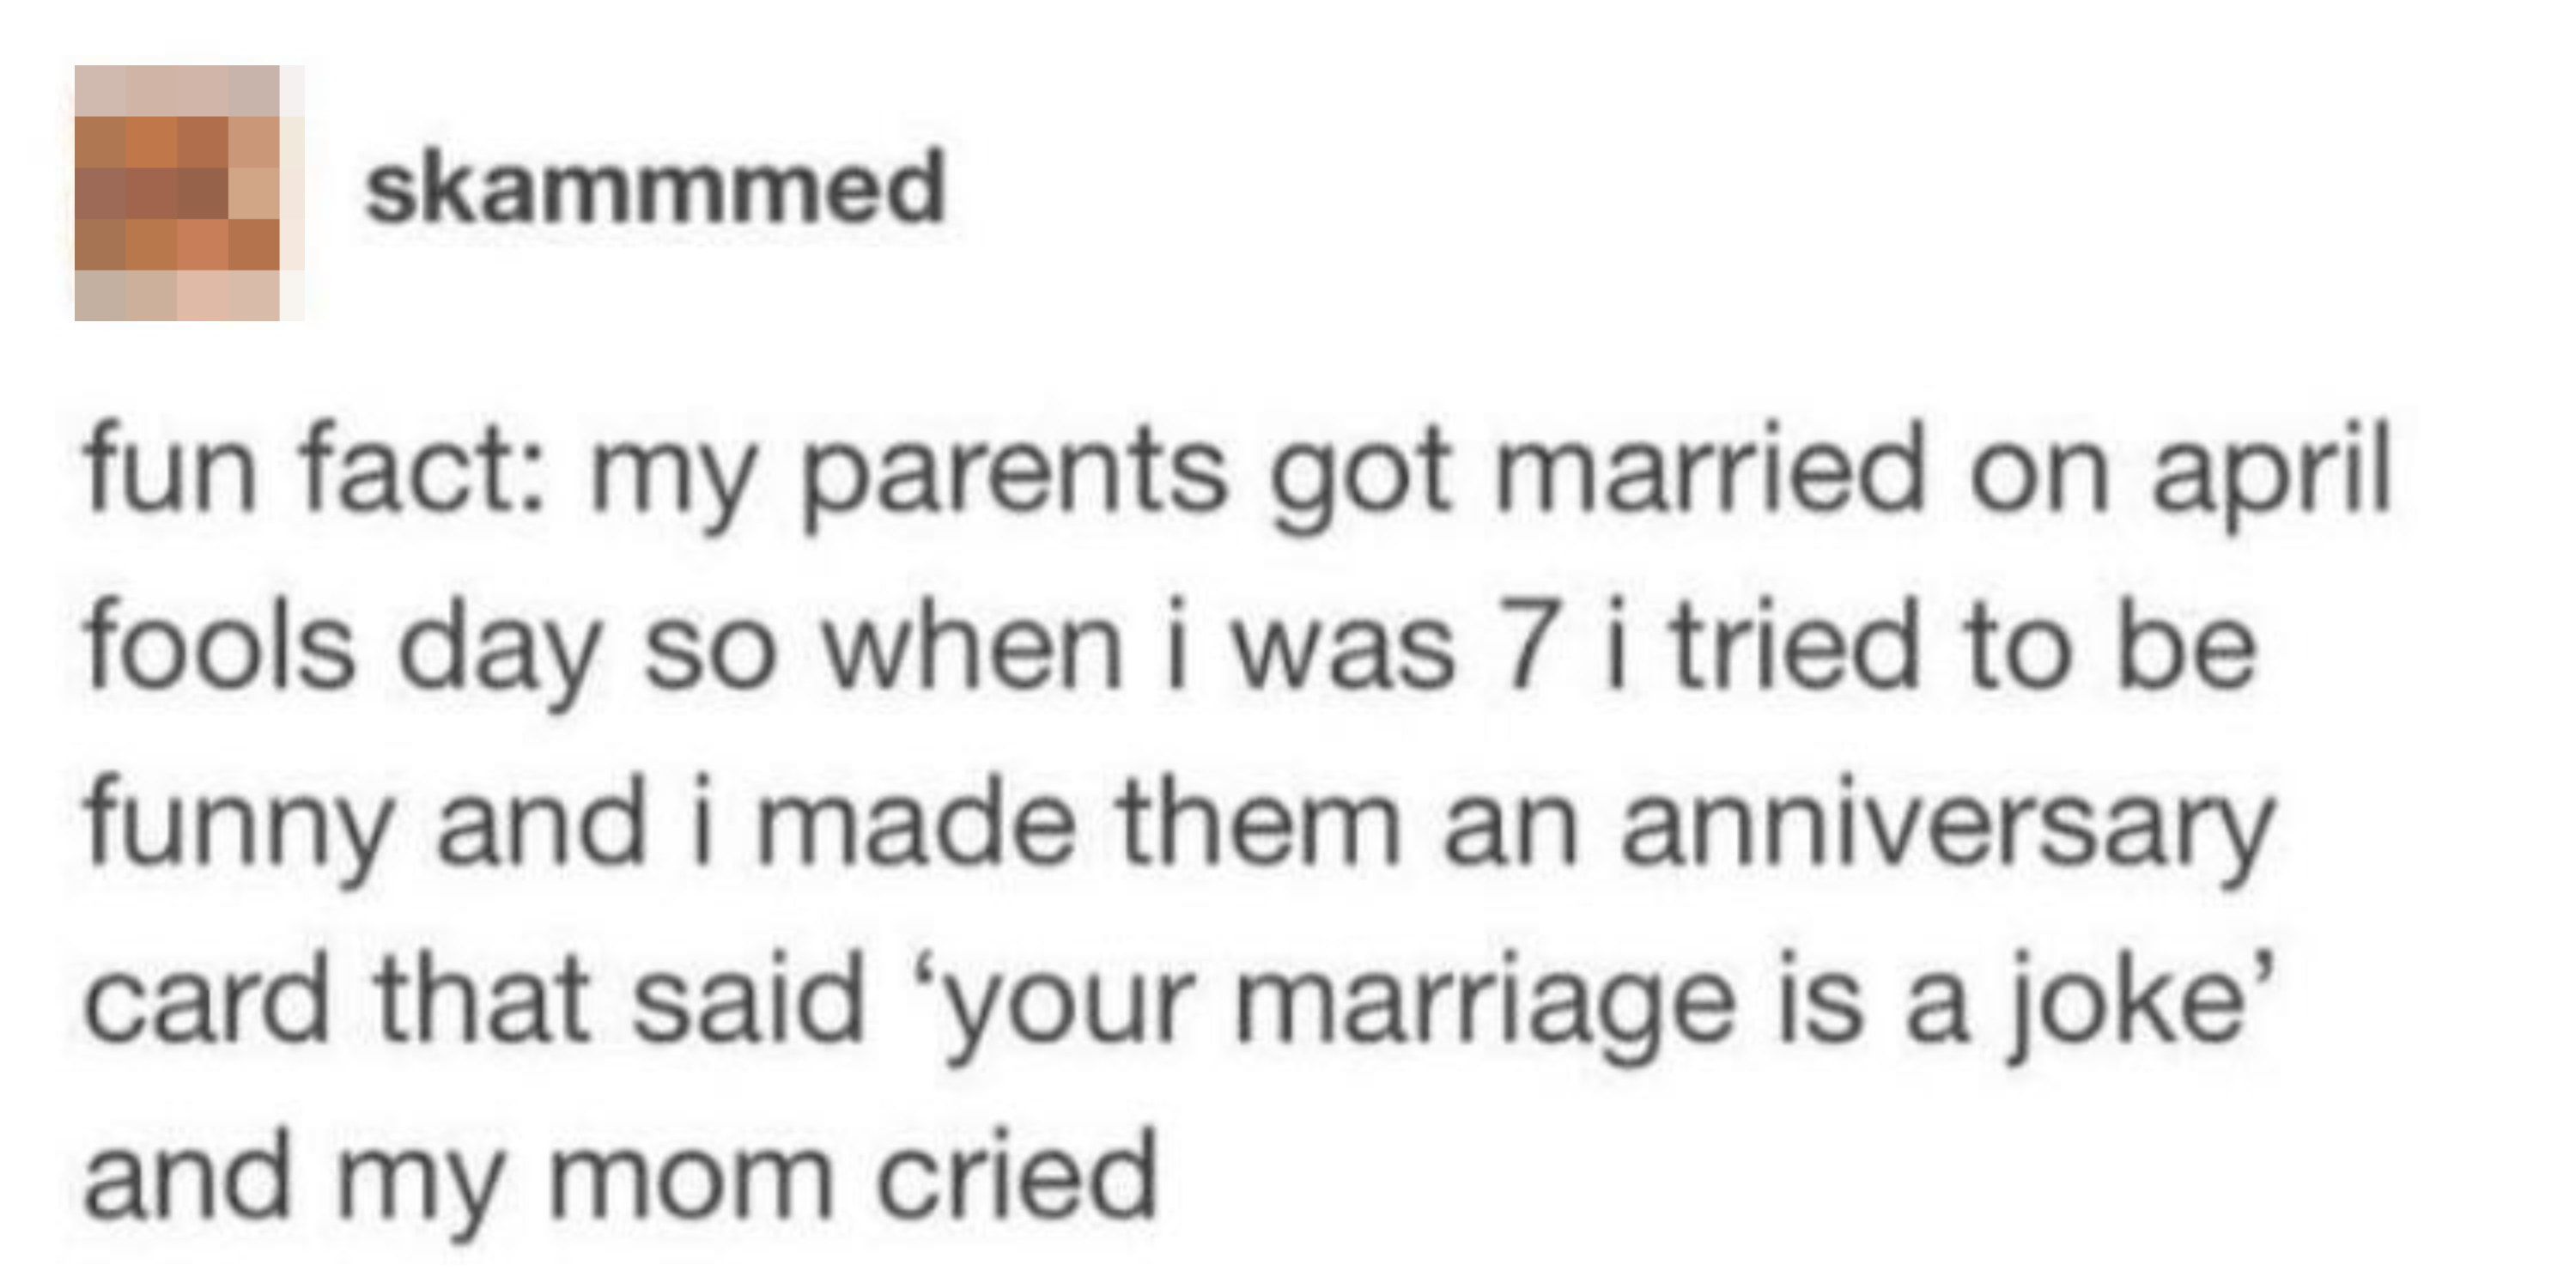 person whose parents got married on april fools day so they tell them their marriage is a joke